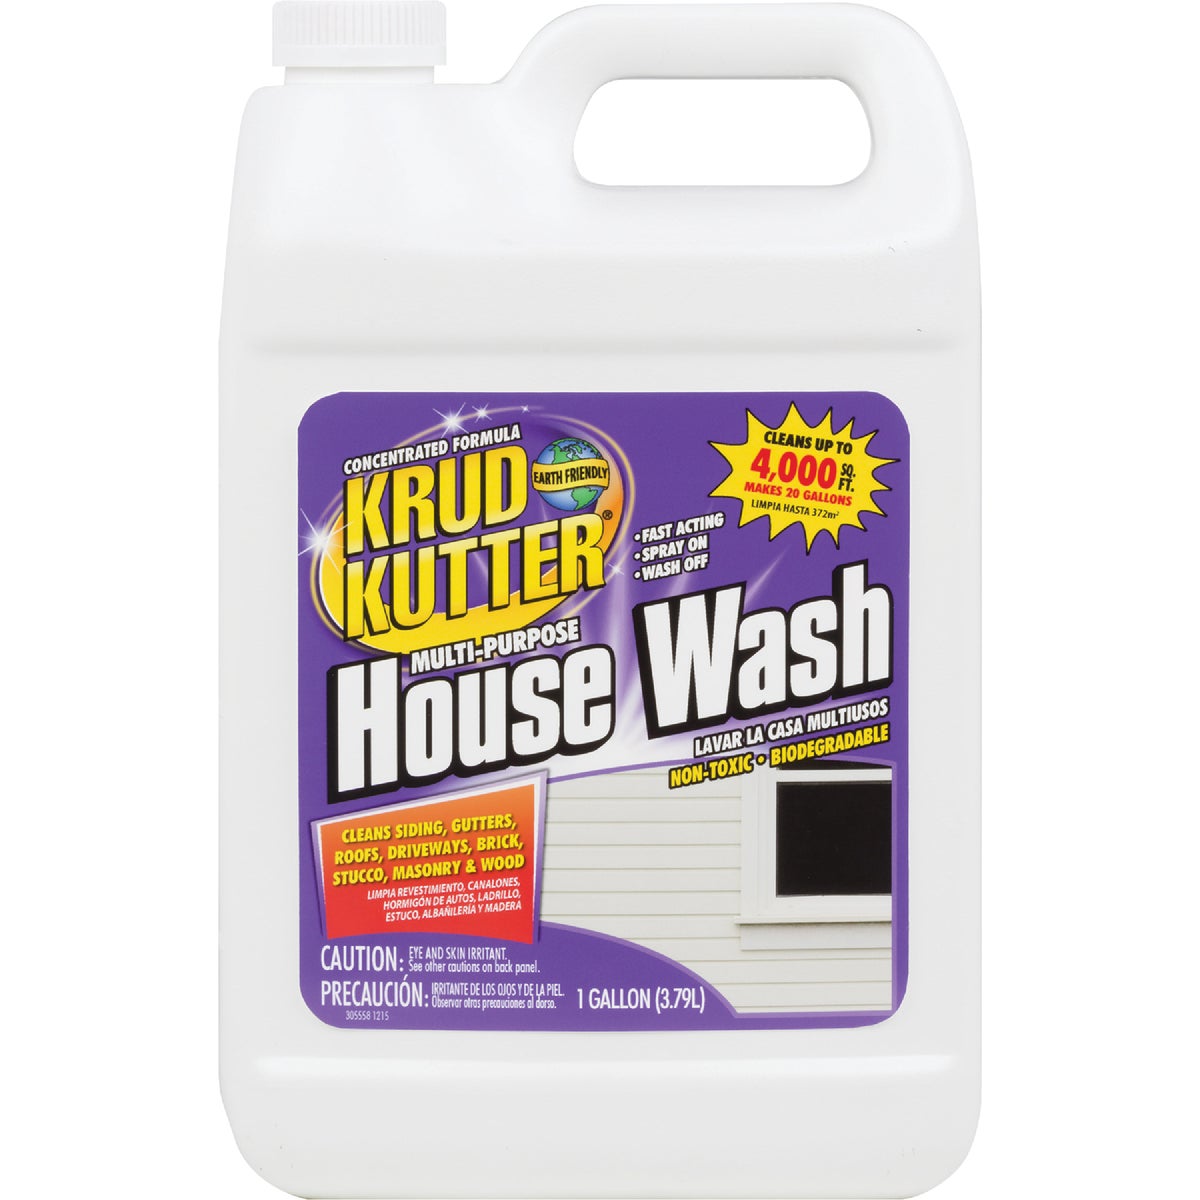 Item 782029, Removes tough stains such as mildew, mold, dirt, and grease on most 